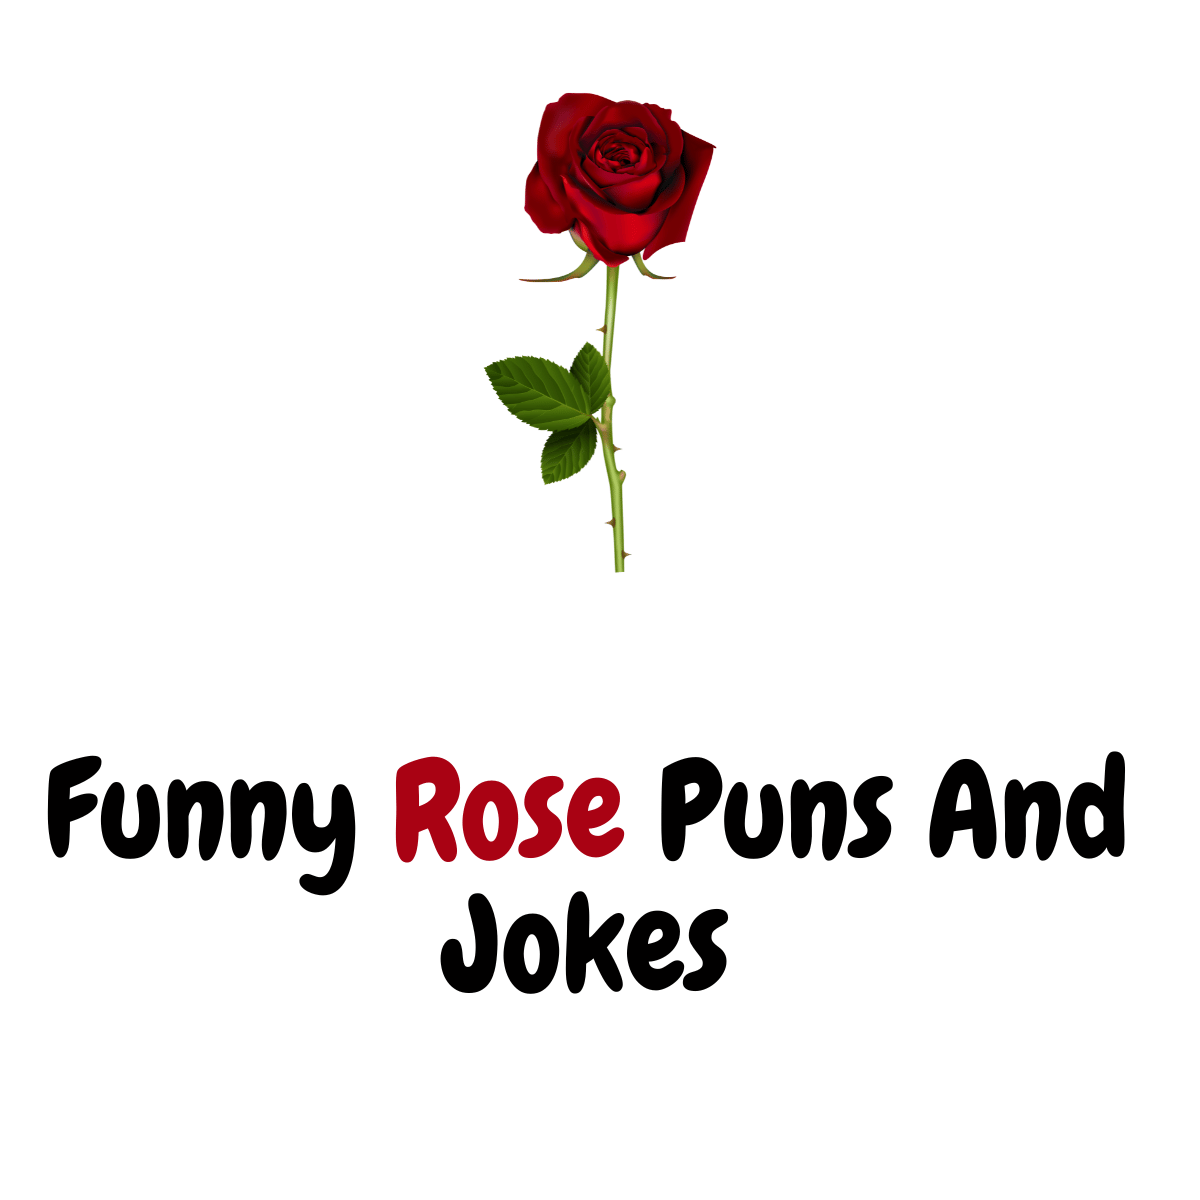 110+ Funny Rose Puns And Jokes: Blooming with Humor